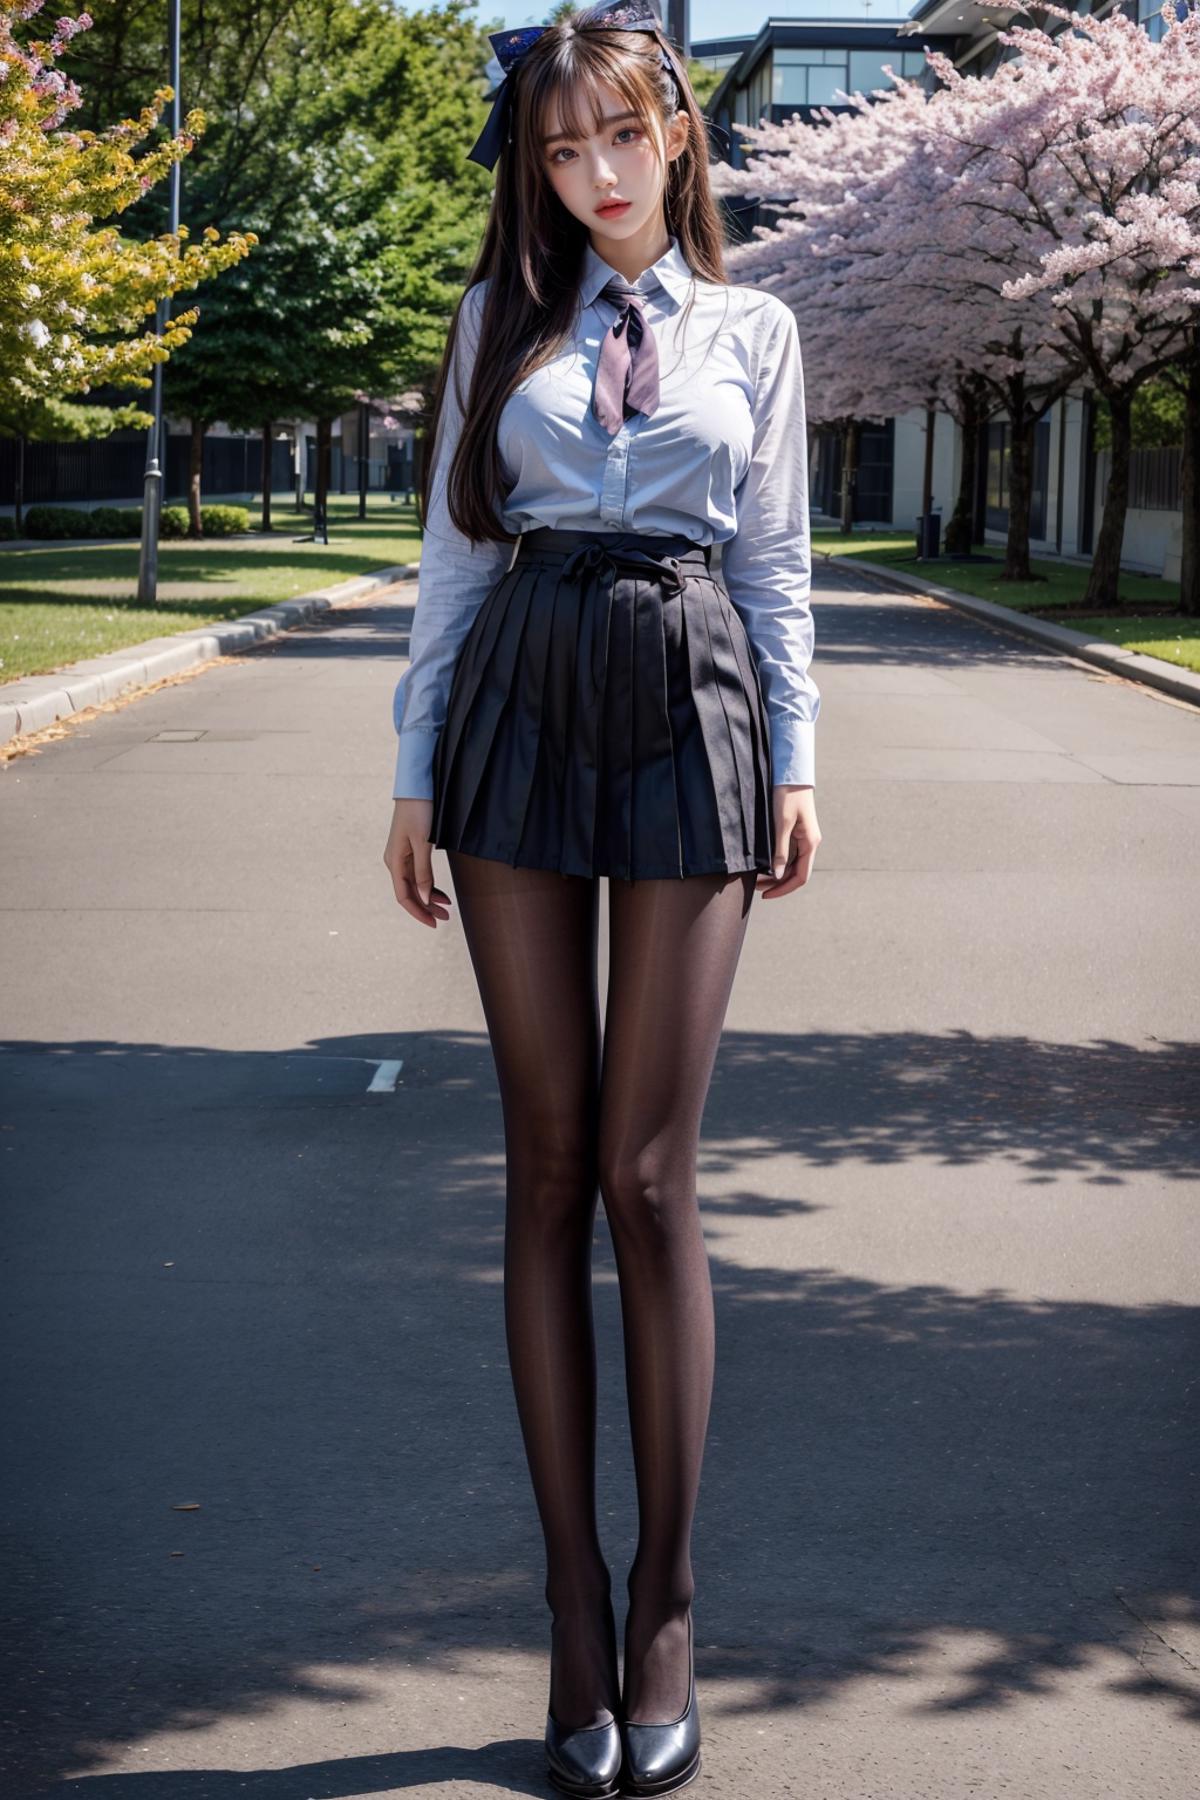 A woman standing on a street wearing a tie, skirt, and fishnet stockings.